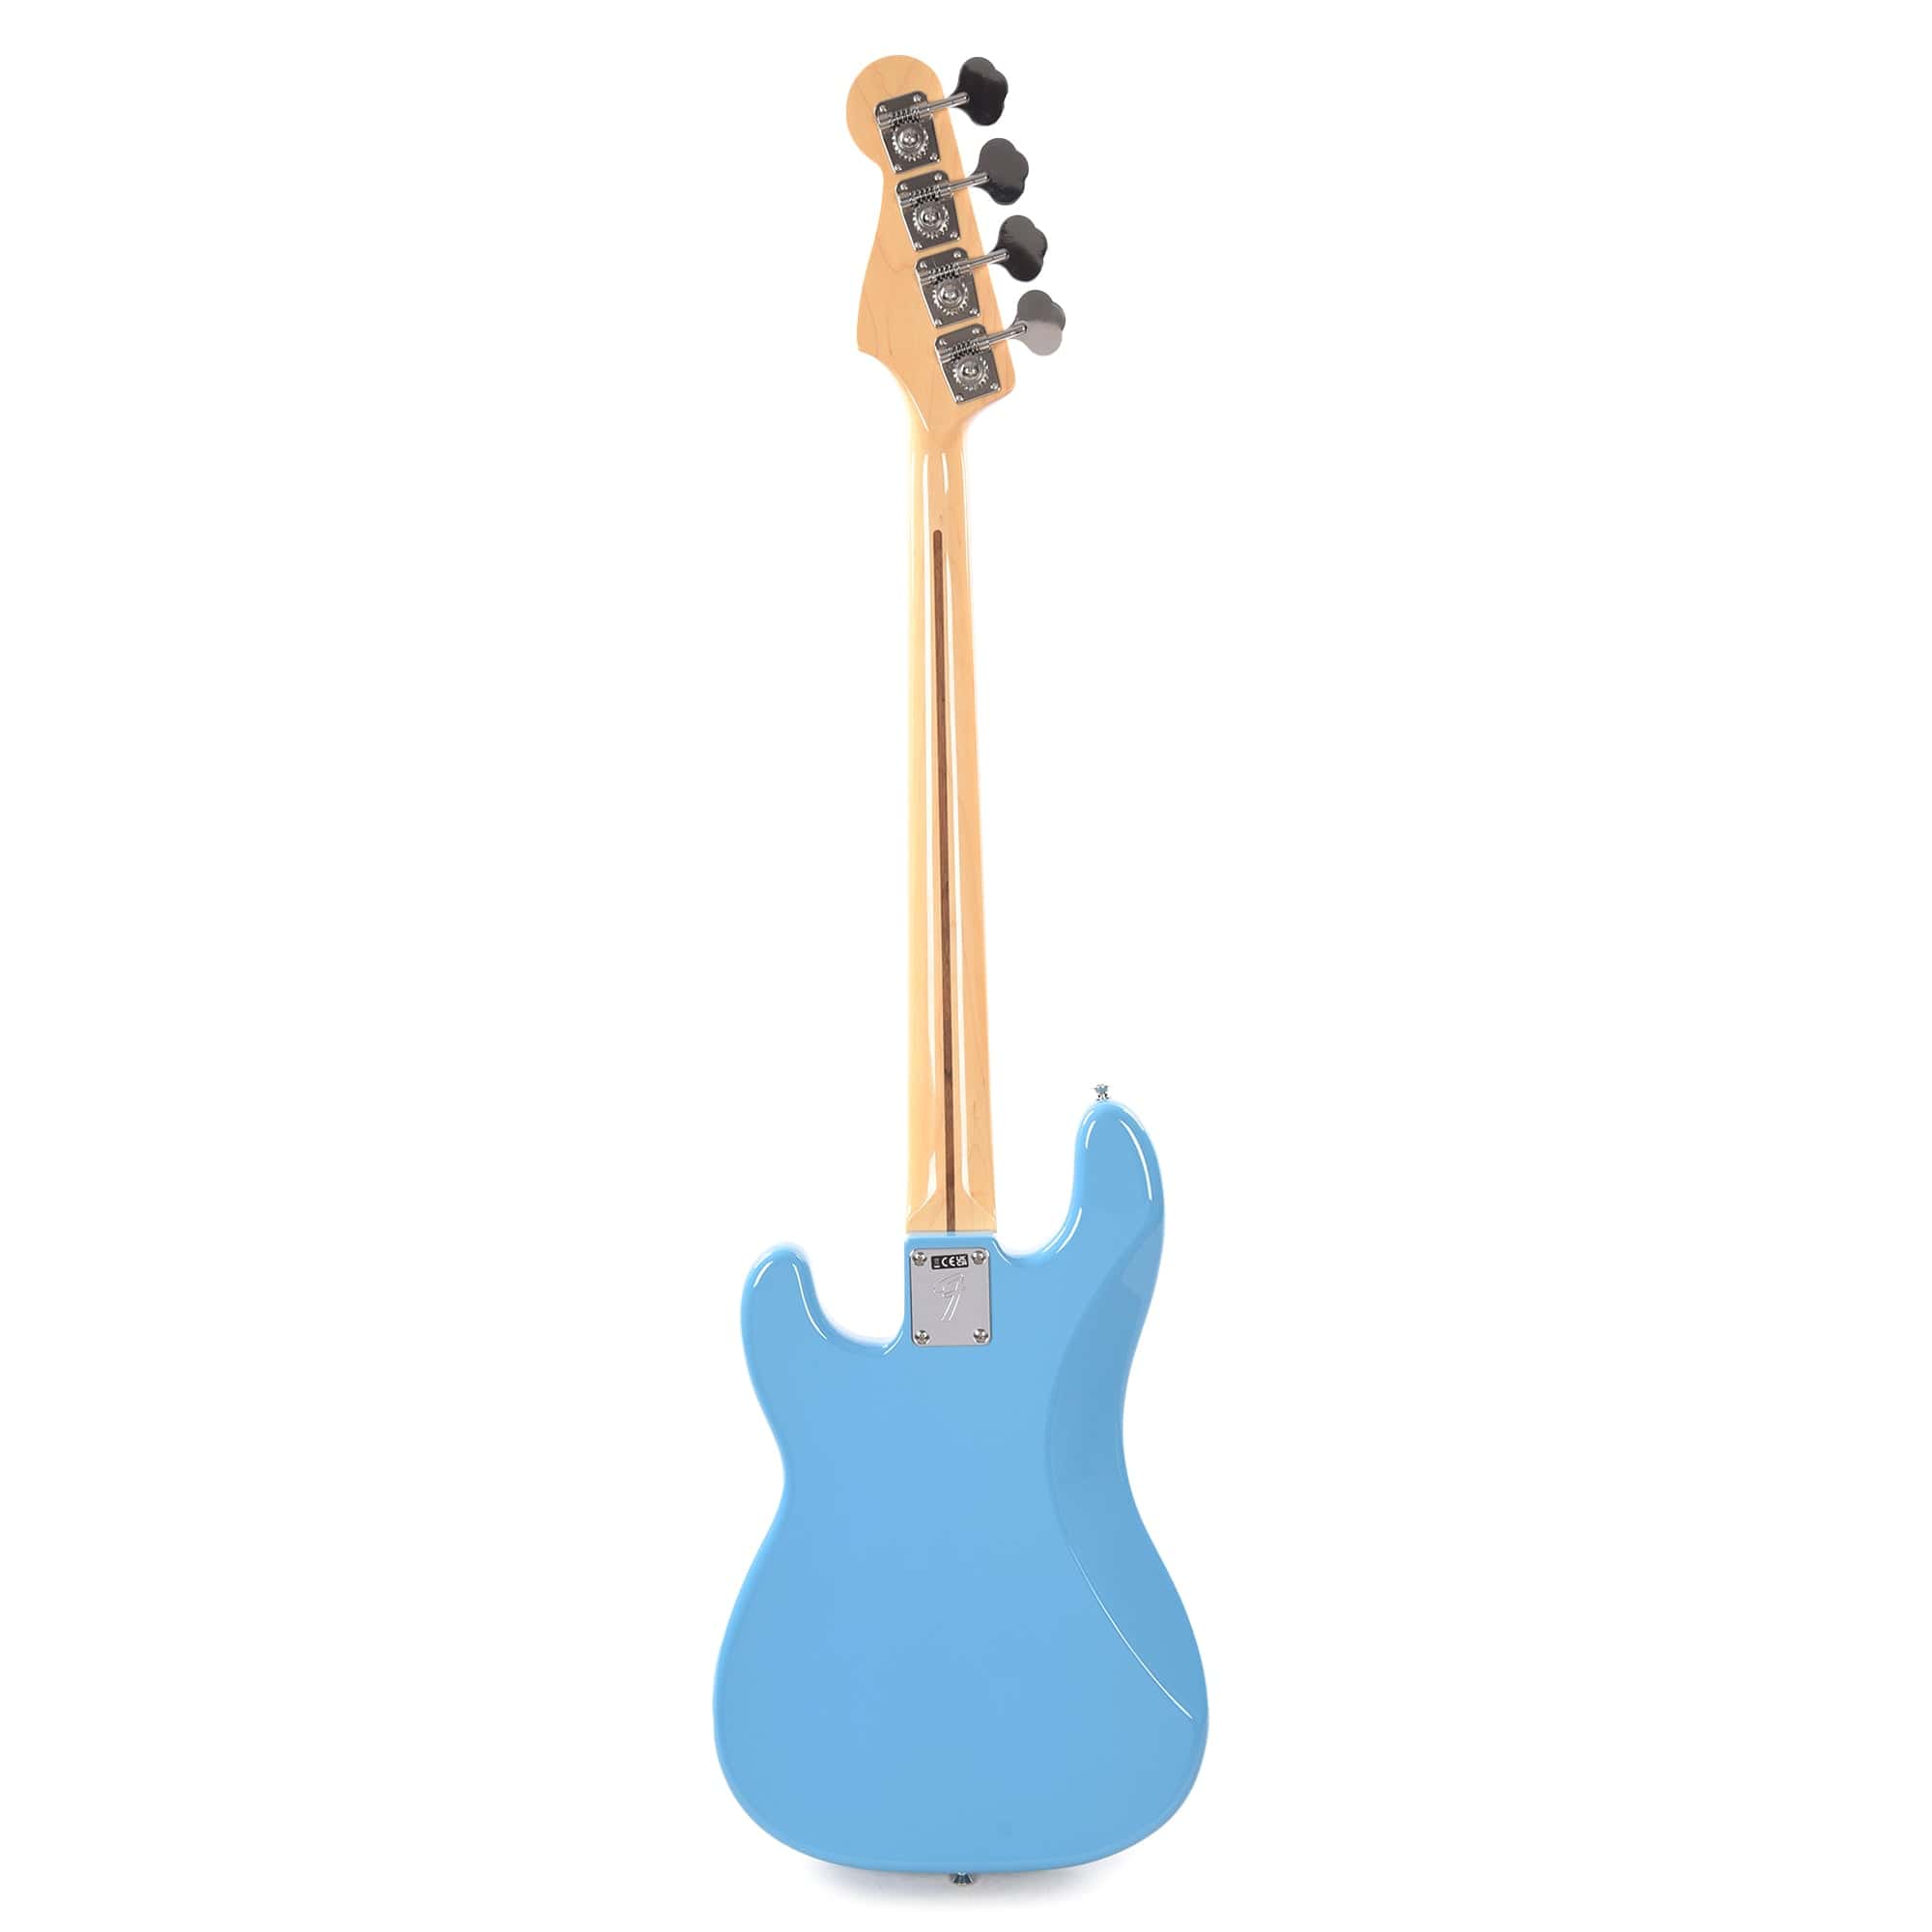 Fender Made in Japan Limited International Color Series Precision Bass Maui Blue Bass Guitars / 4-String